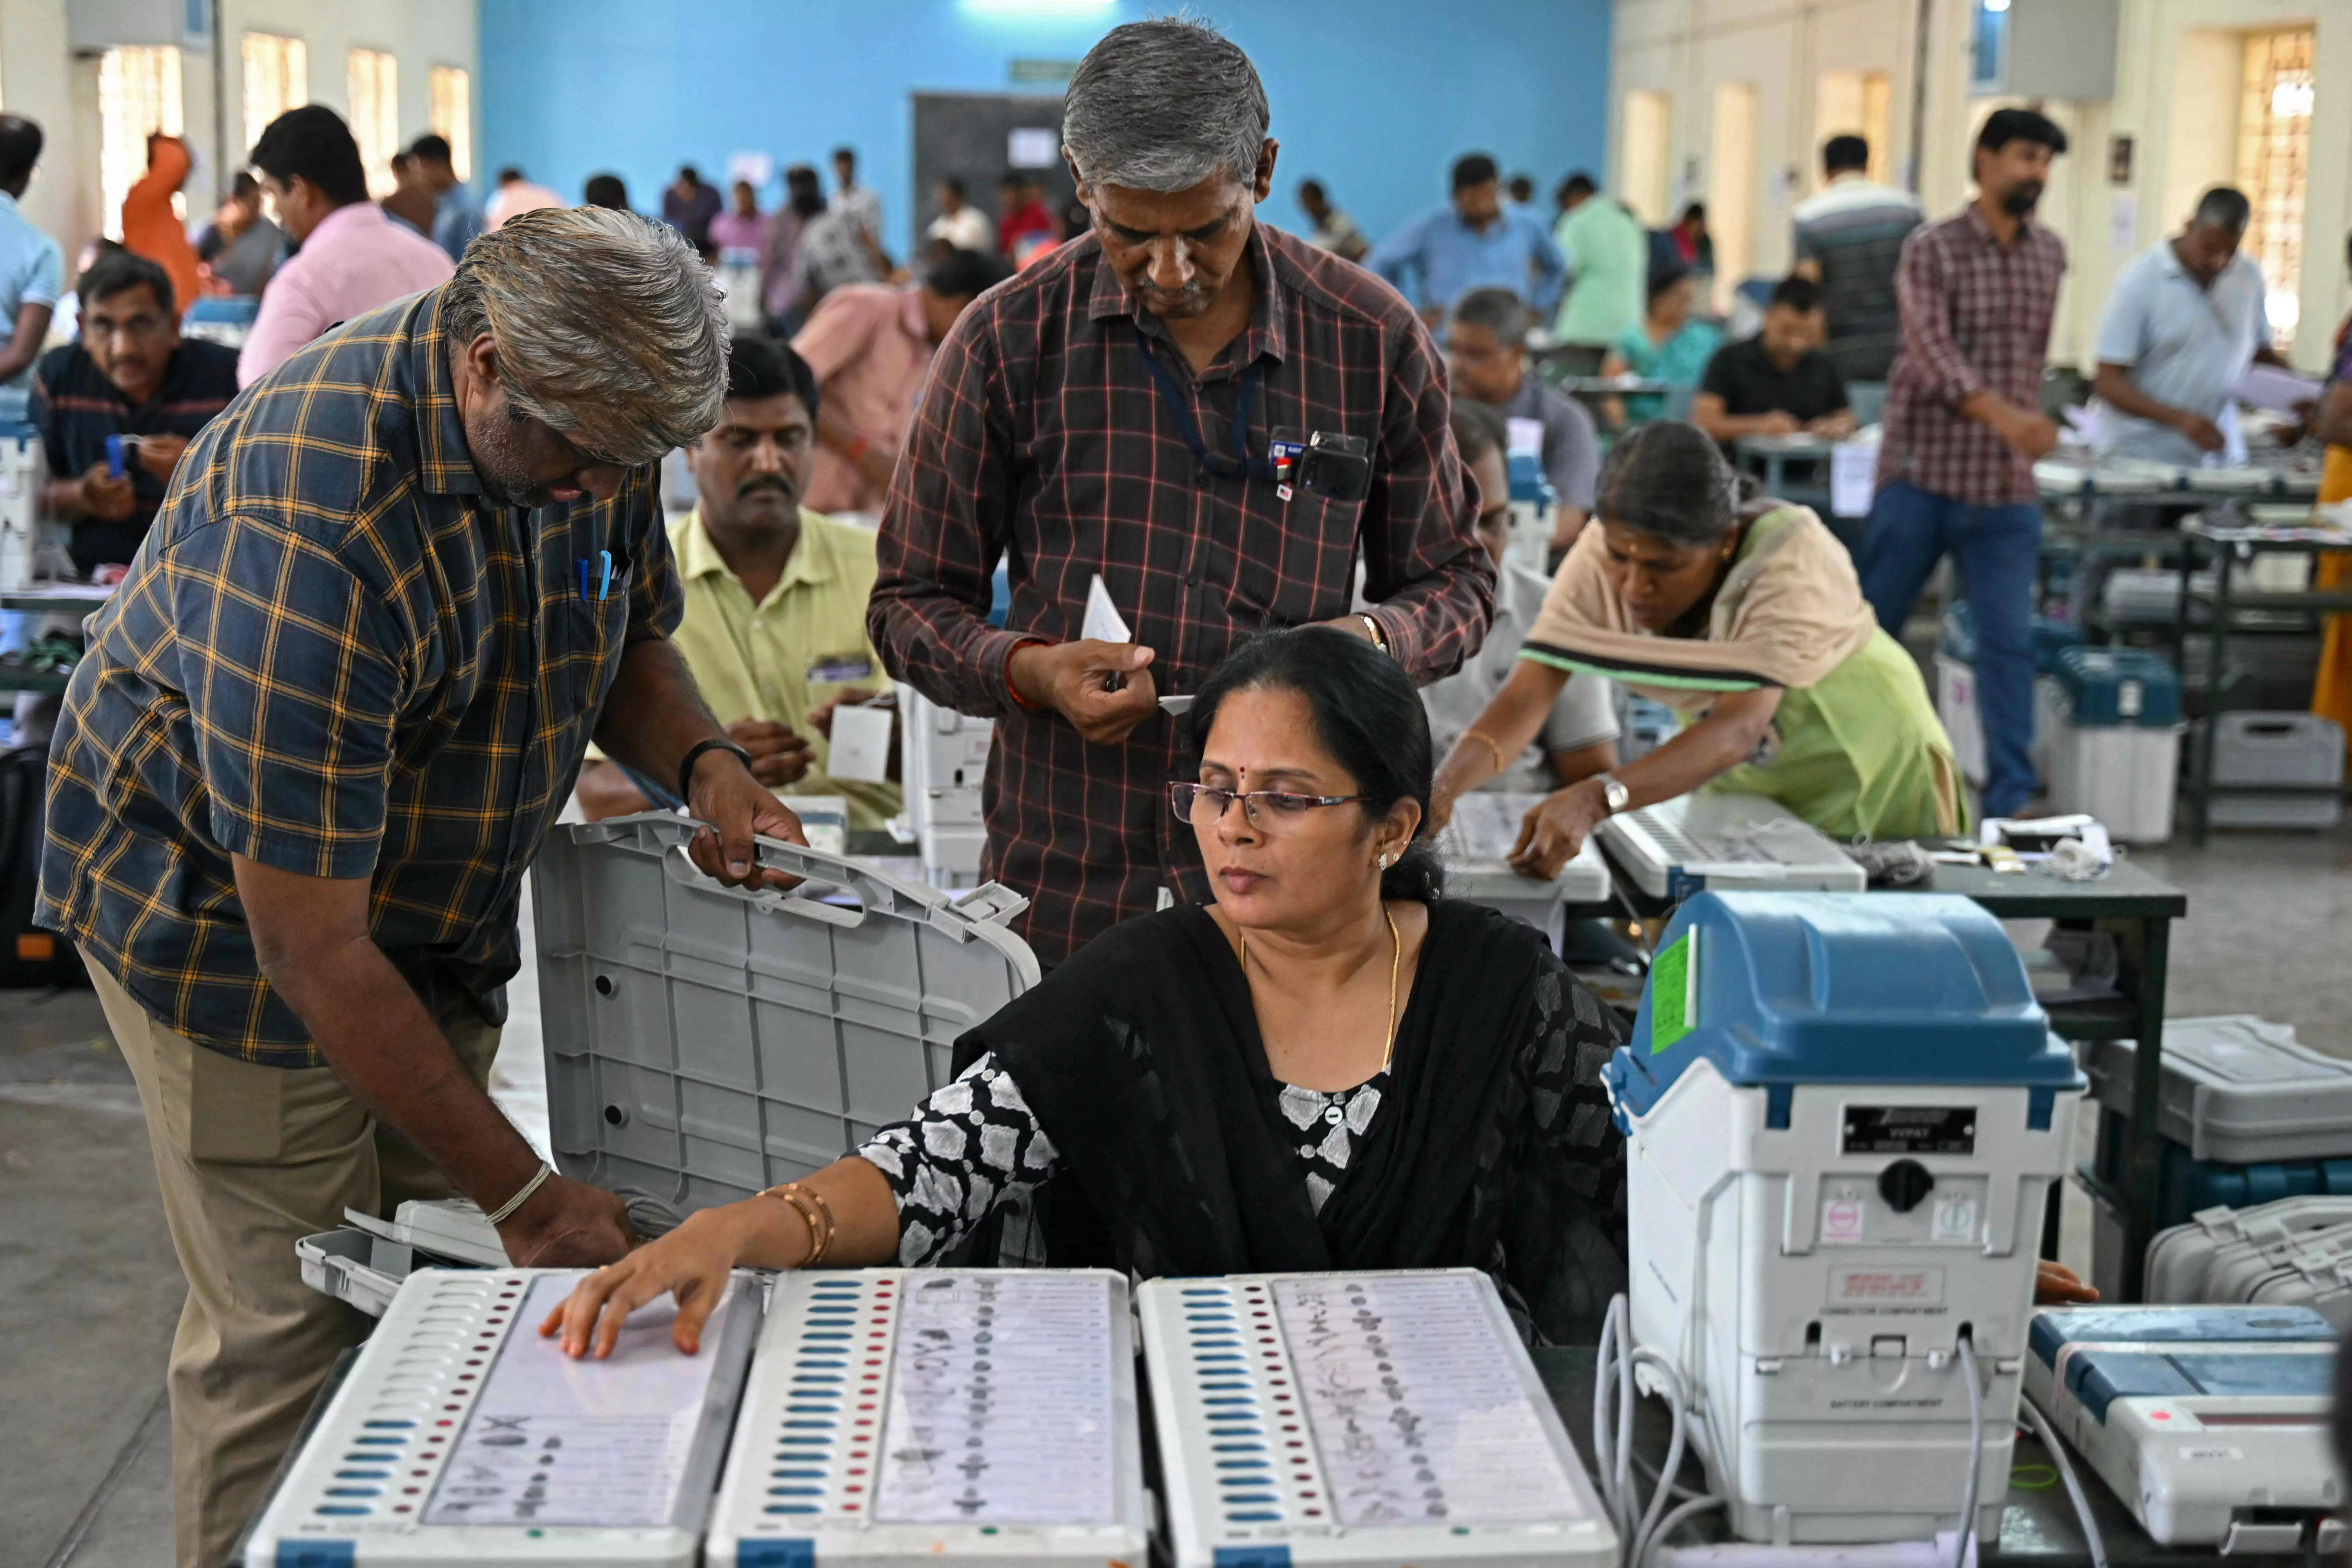 LS polls: Poll officials to send out 20 lakh invites to Gujarat voters in bid to increase turnout